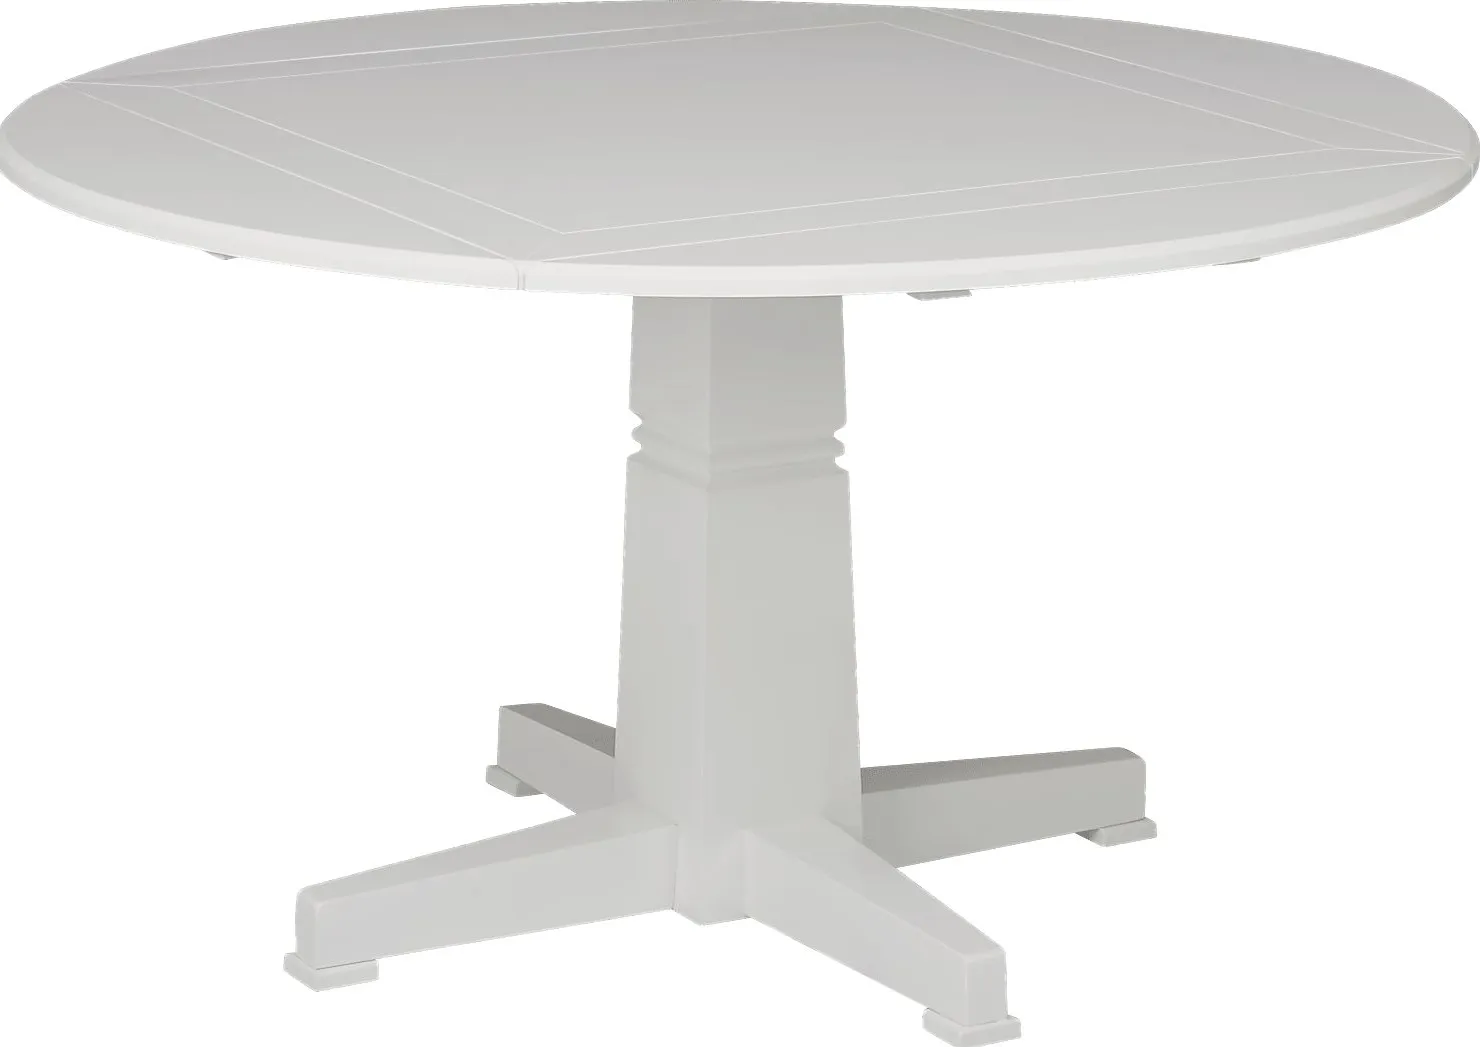 Riverdale White Round Dining Table